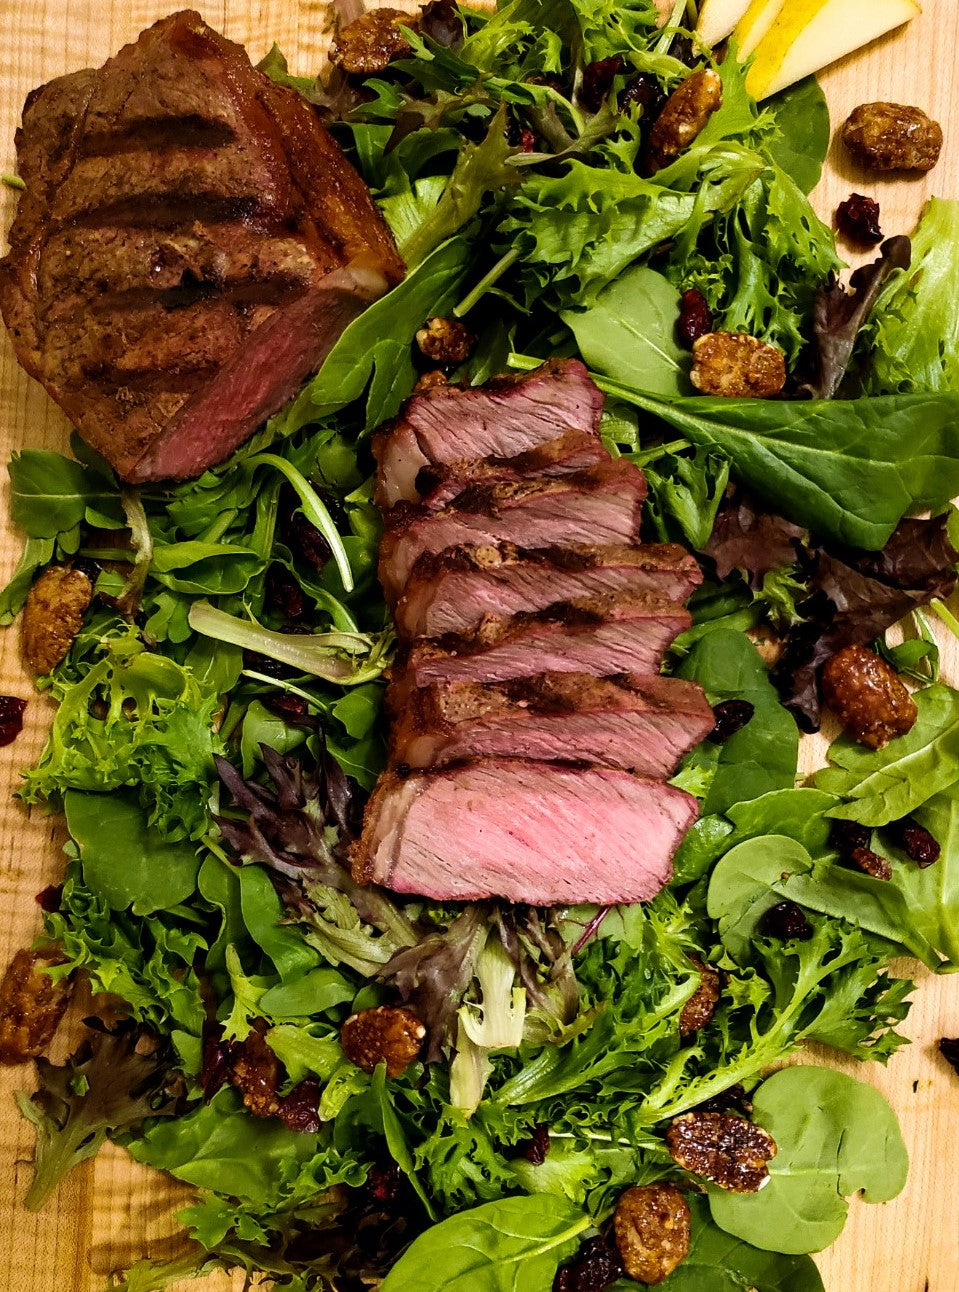 Grilled Steak Salad with Homemade Dressing